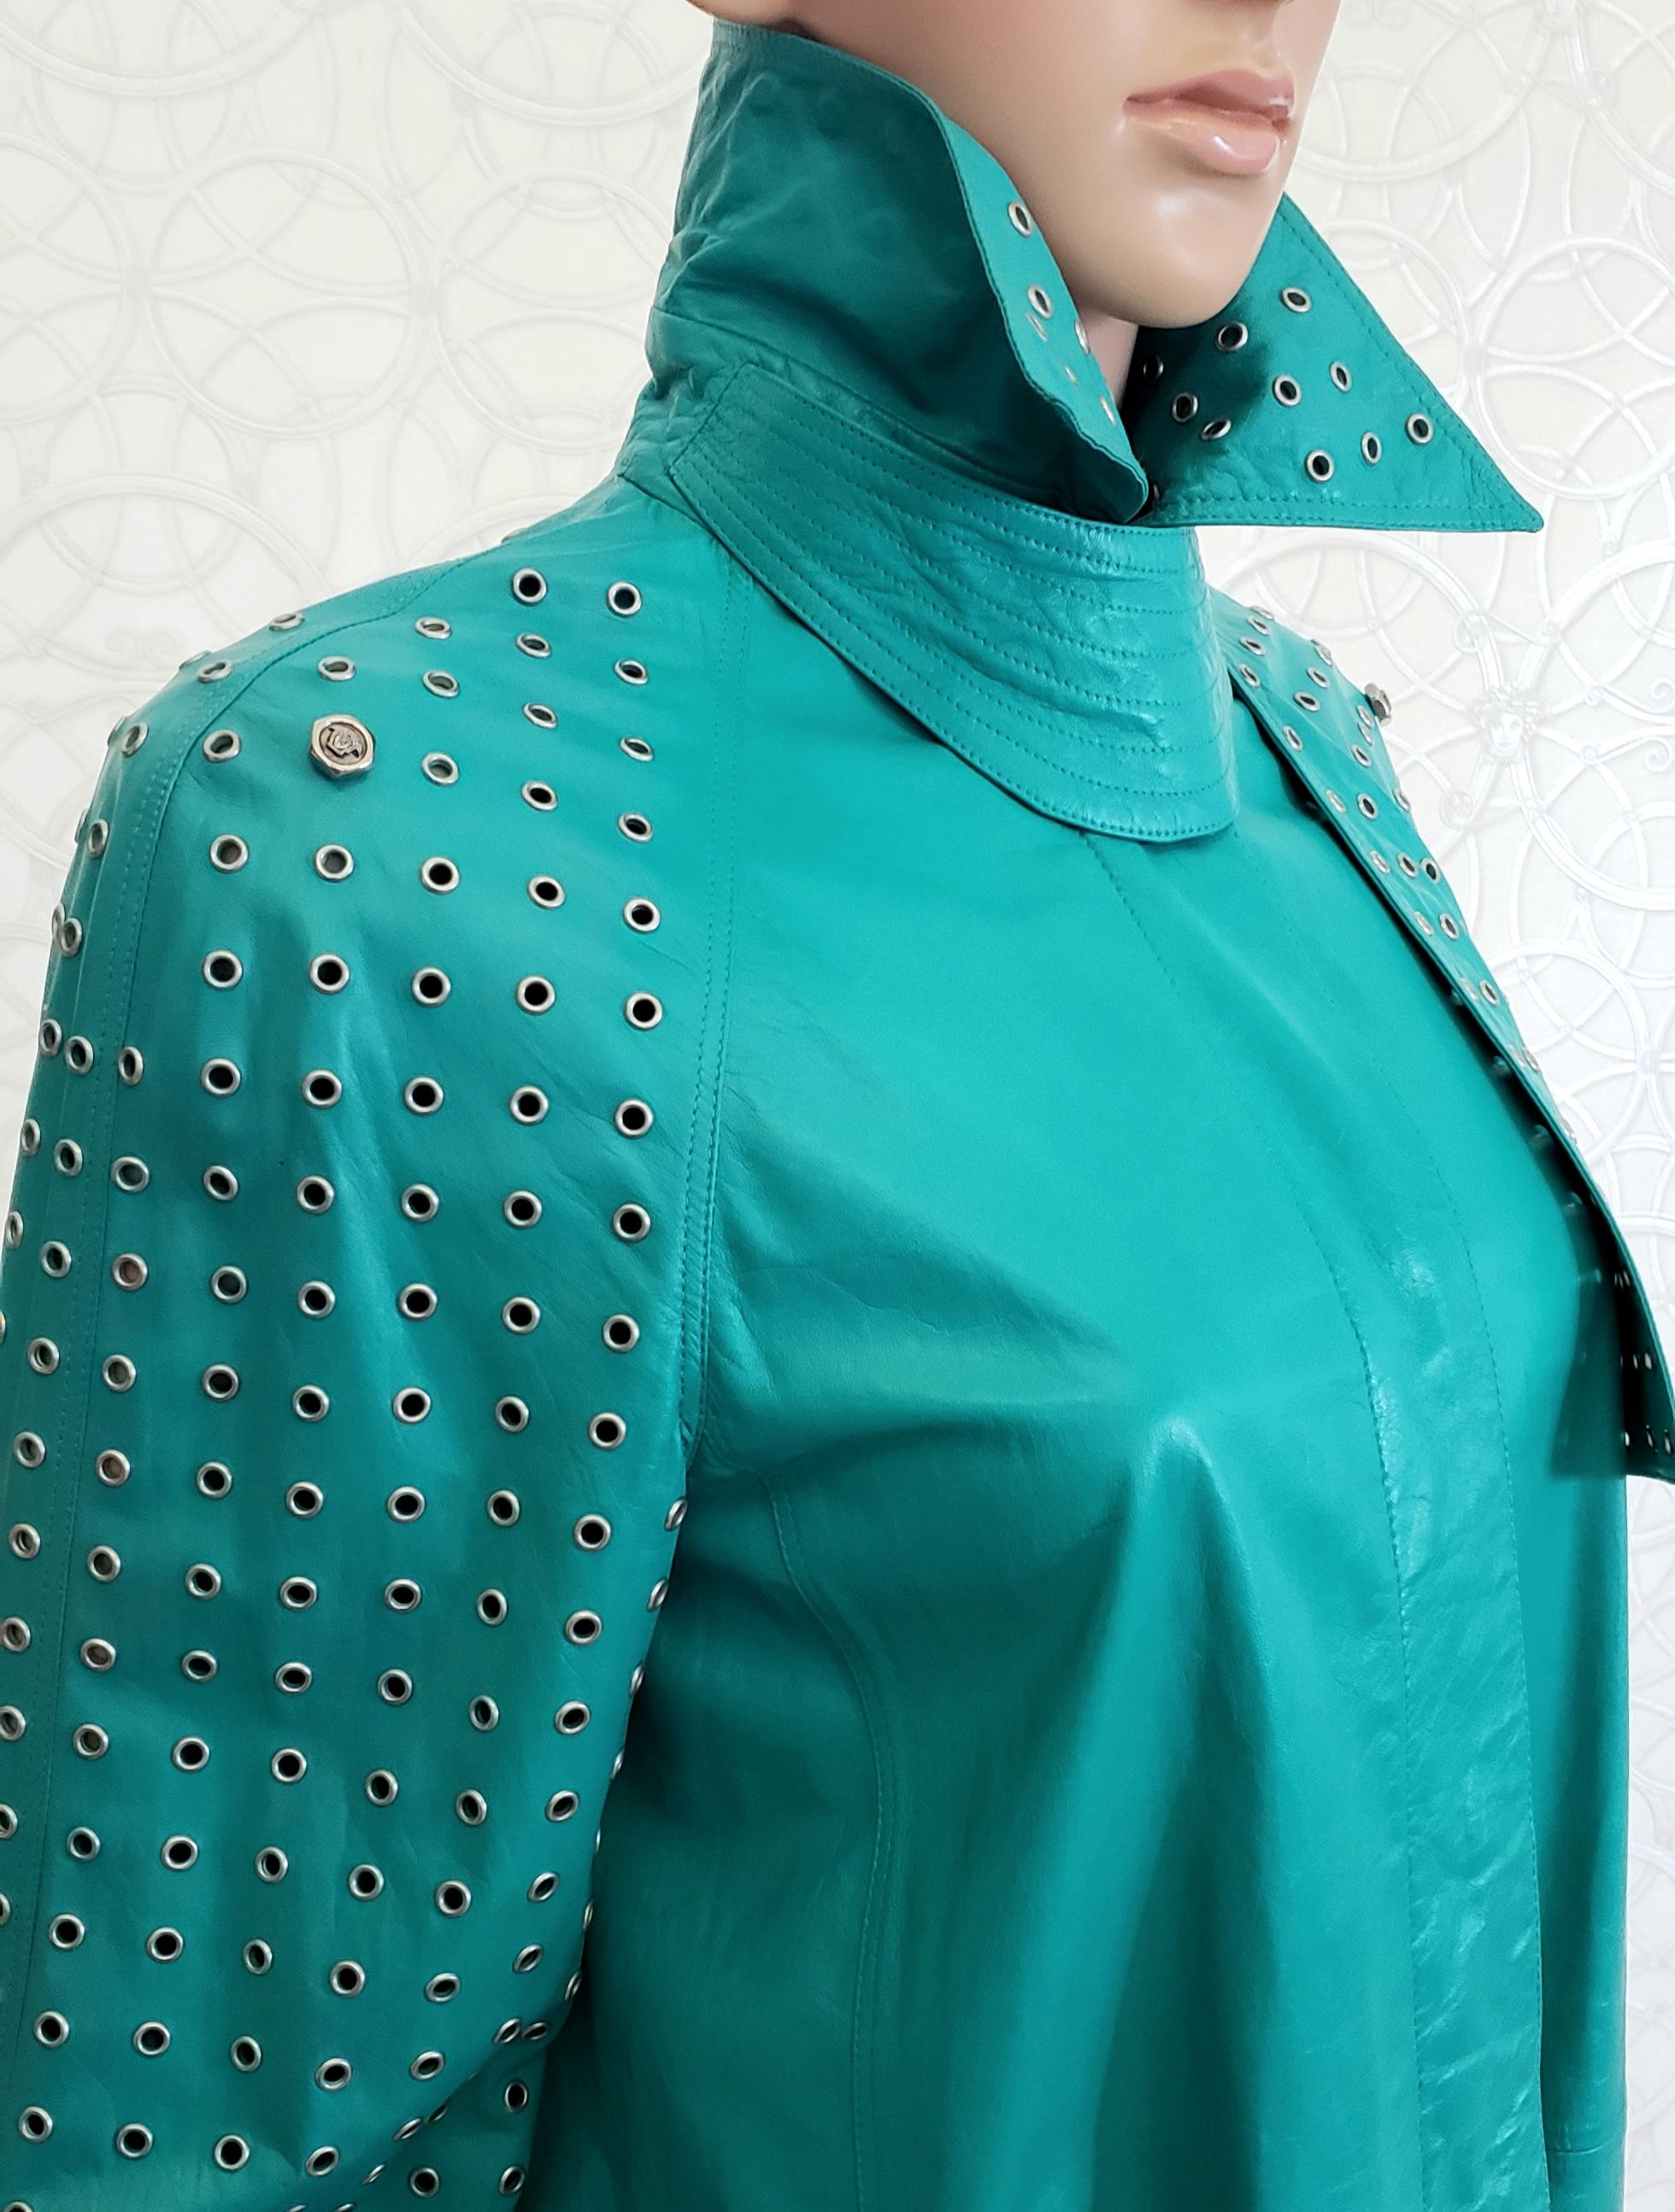 NEW GIANNI VERSACE EMERALD GREEN LEATHER JACKET with RIVETS Sz IT 40 - US 4/6 For Sale 8